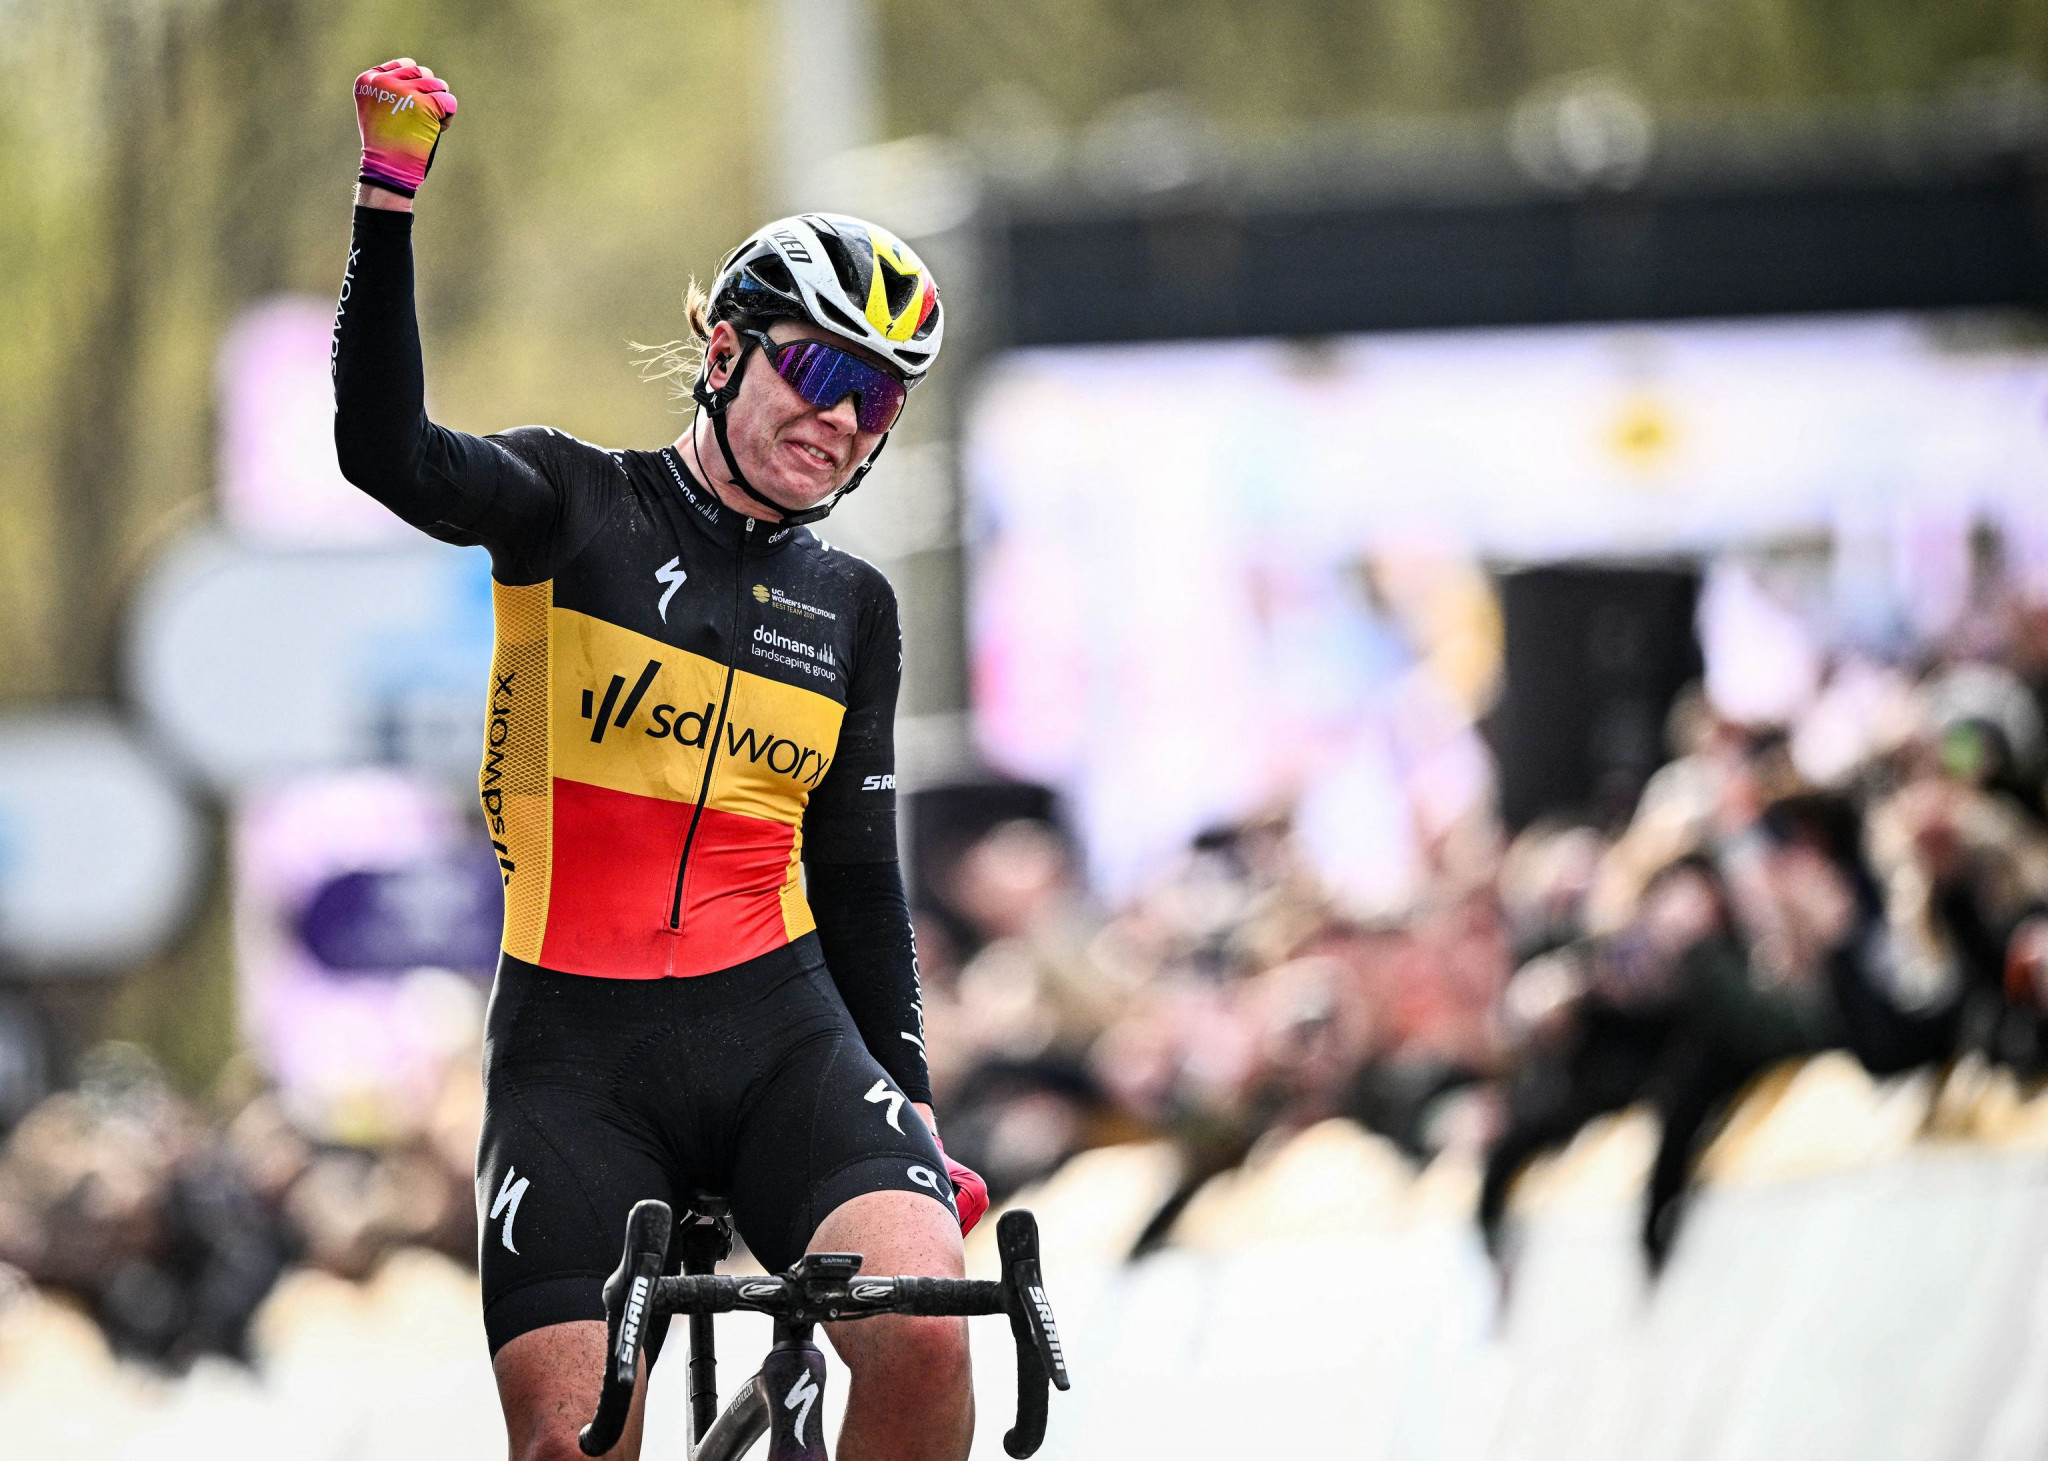 
Belgian Lotte Kopecky of SD Worx celebrates after winning the women's race at the Tour of Flanders ©Getty Images